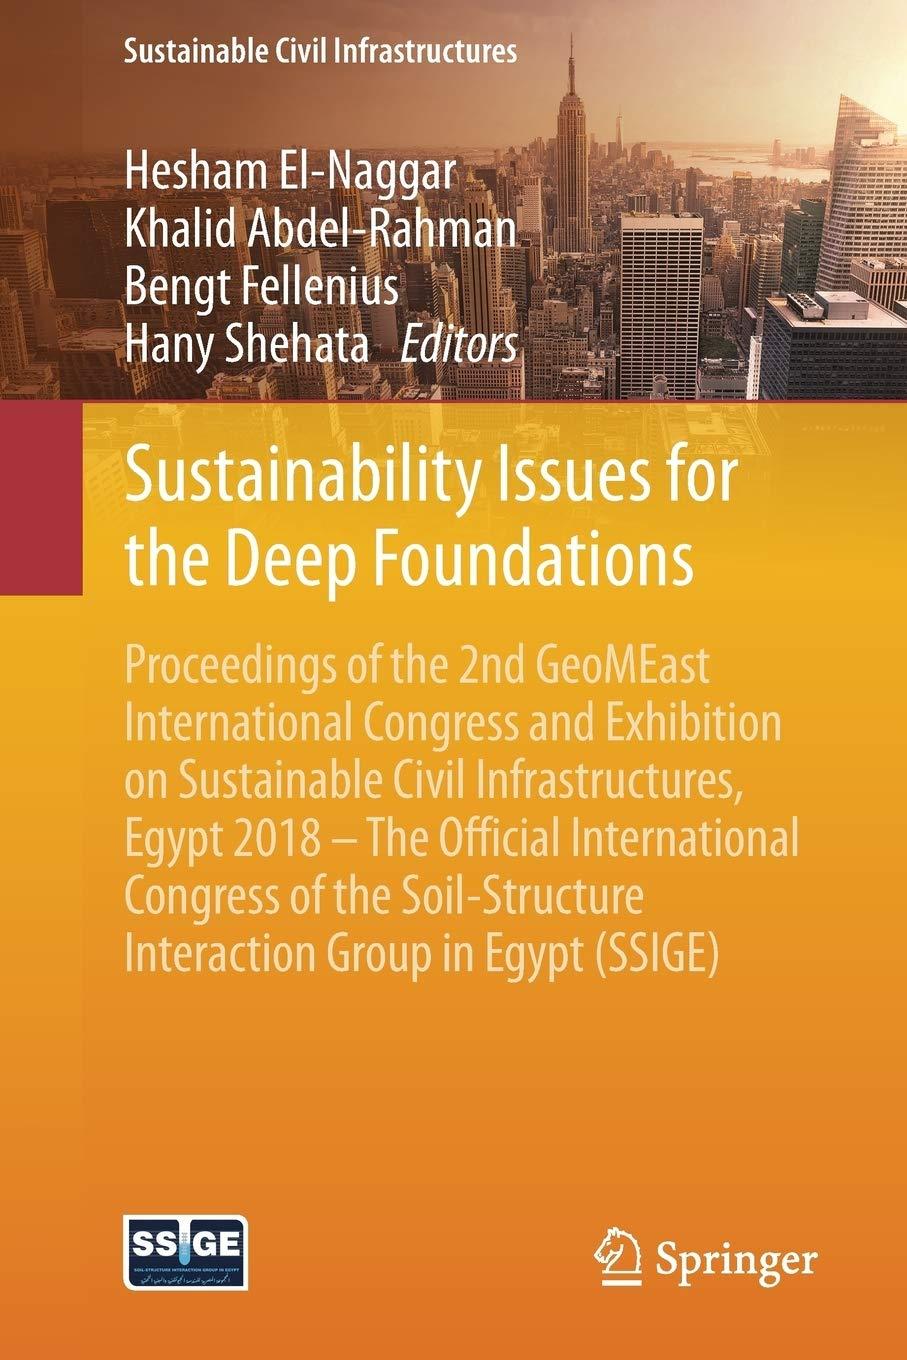 sustainability issues for the deep foundations proceedings of the 2nd geomeast international congress and